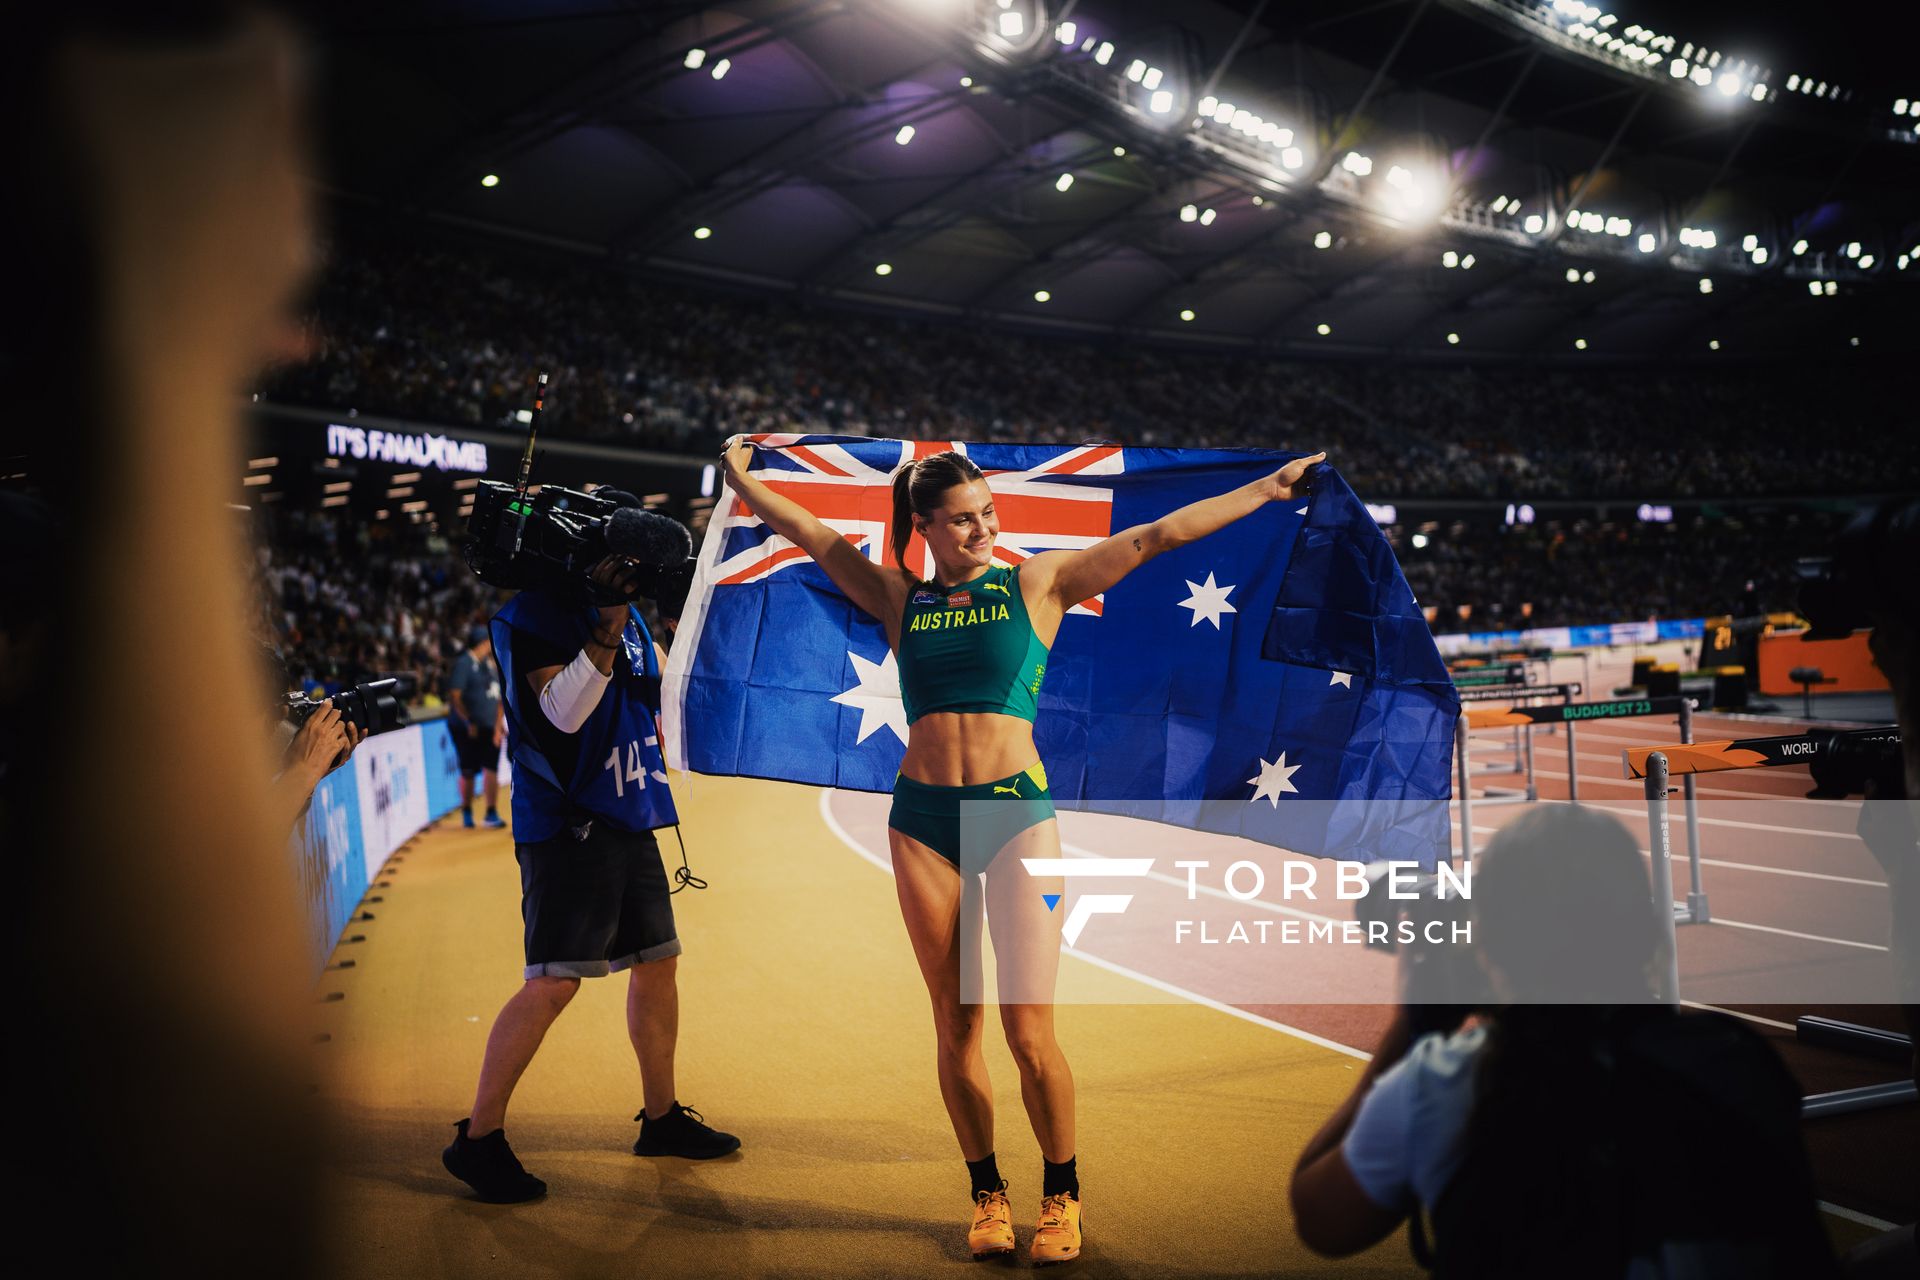 Nina Kennedy (AUS/Australia) on Day 5 of the World Athletics Championships Budapest 23 at the National Athletics Centre in Budapest, Hungary on August 23, 2023.